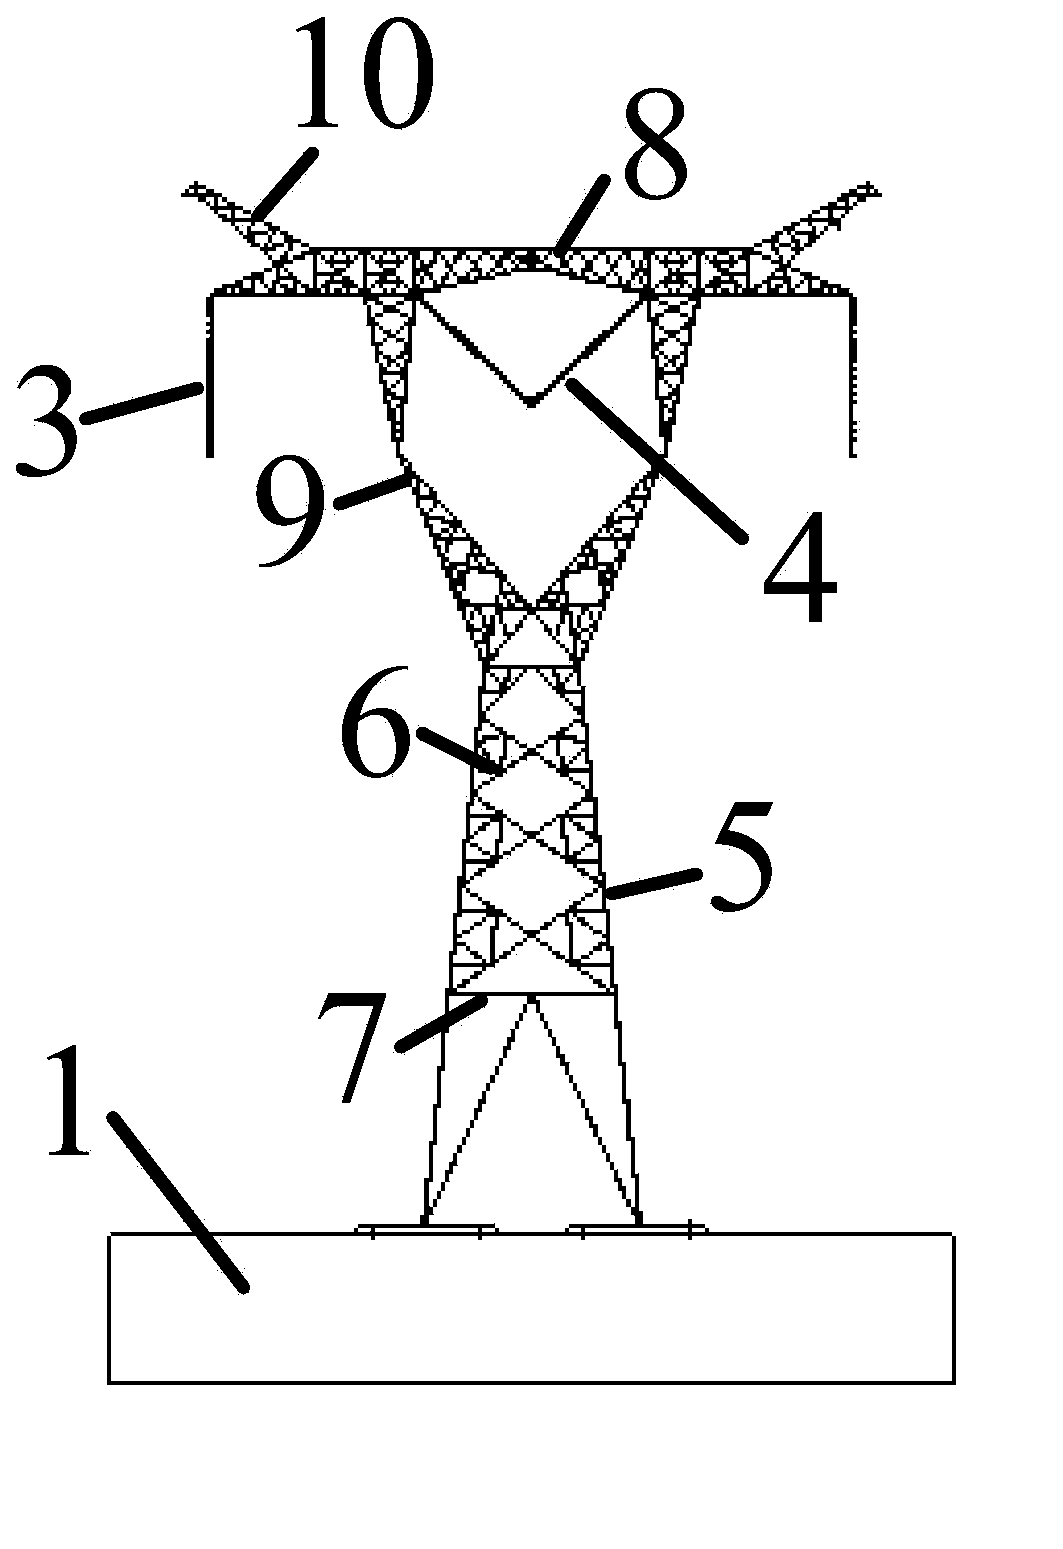 A seismic table test device for transmission tower line system